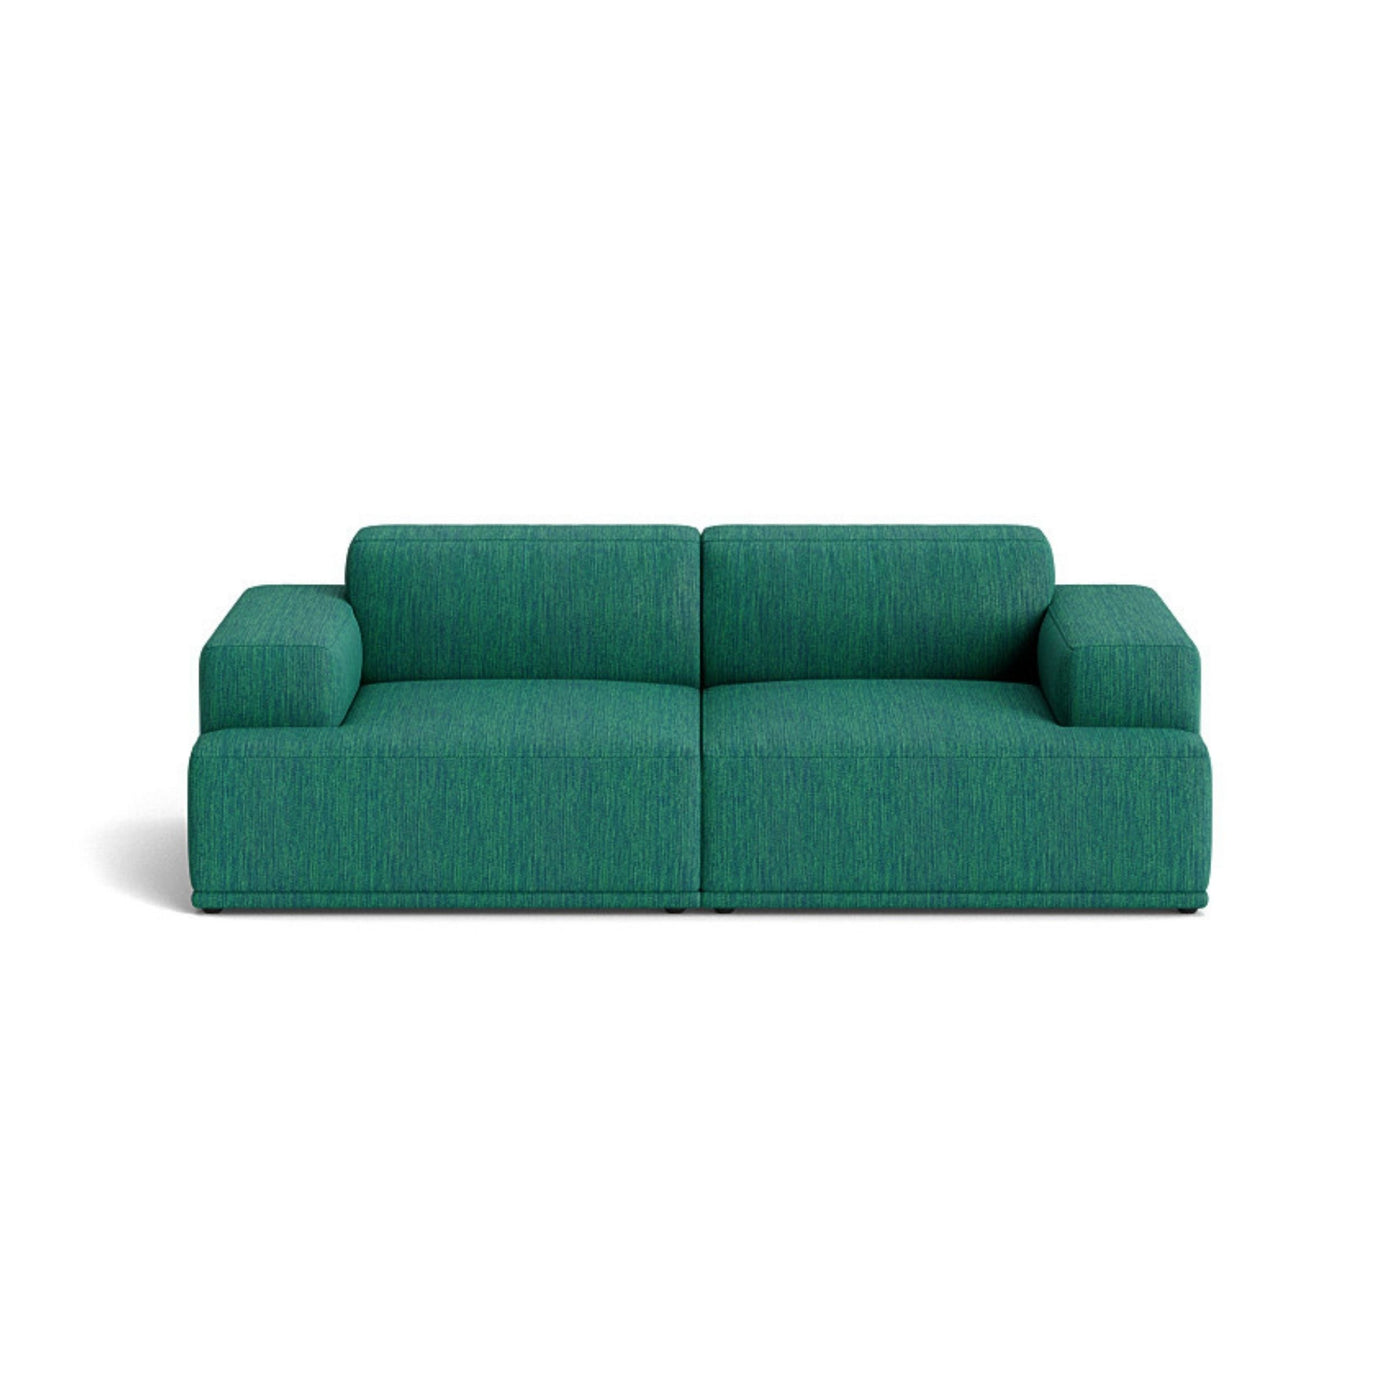 Muuto Connect Soft Modular 2 Seater Sofa, configuration 1. made-to-order from someday designs. #colour_balder-862